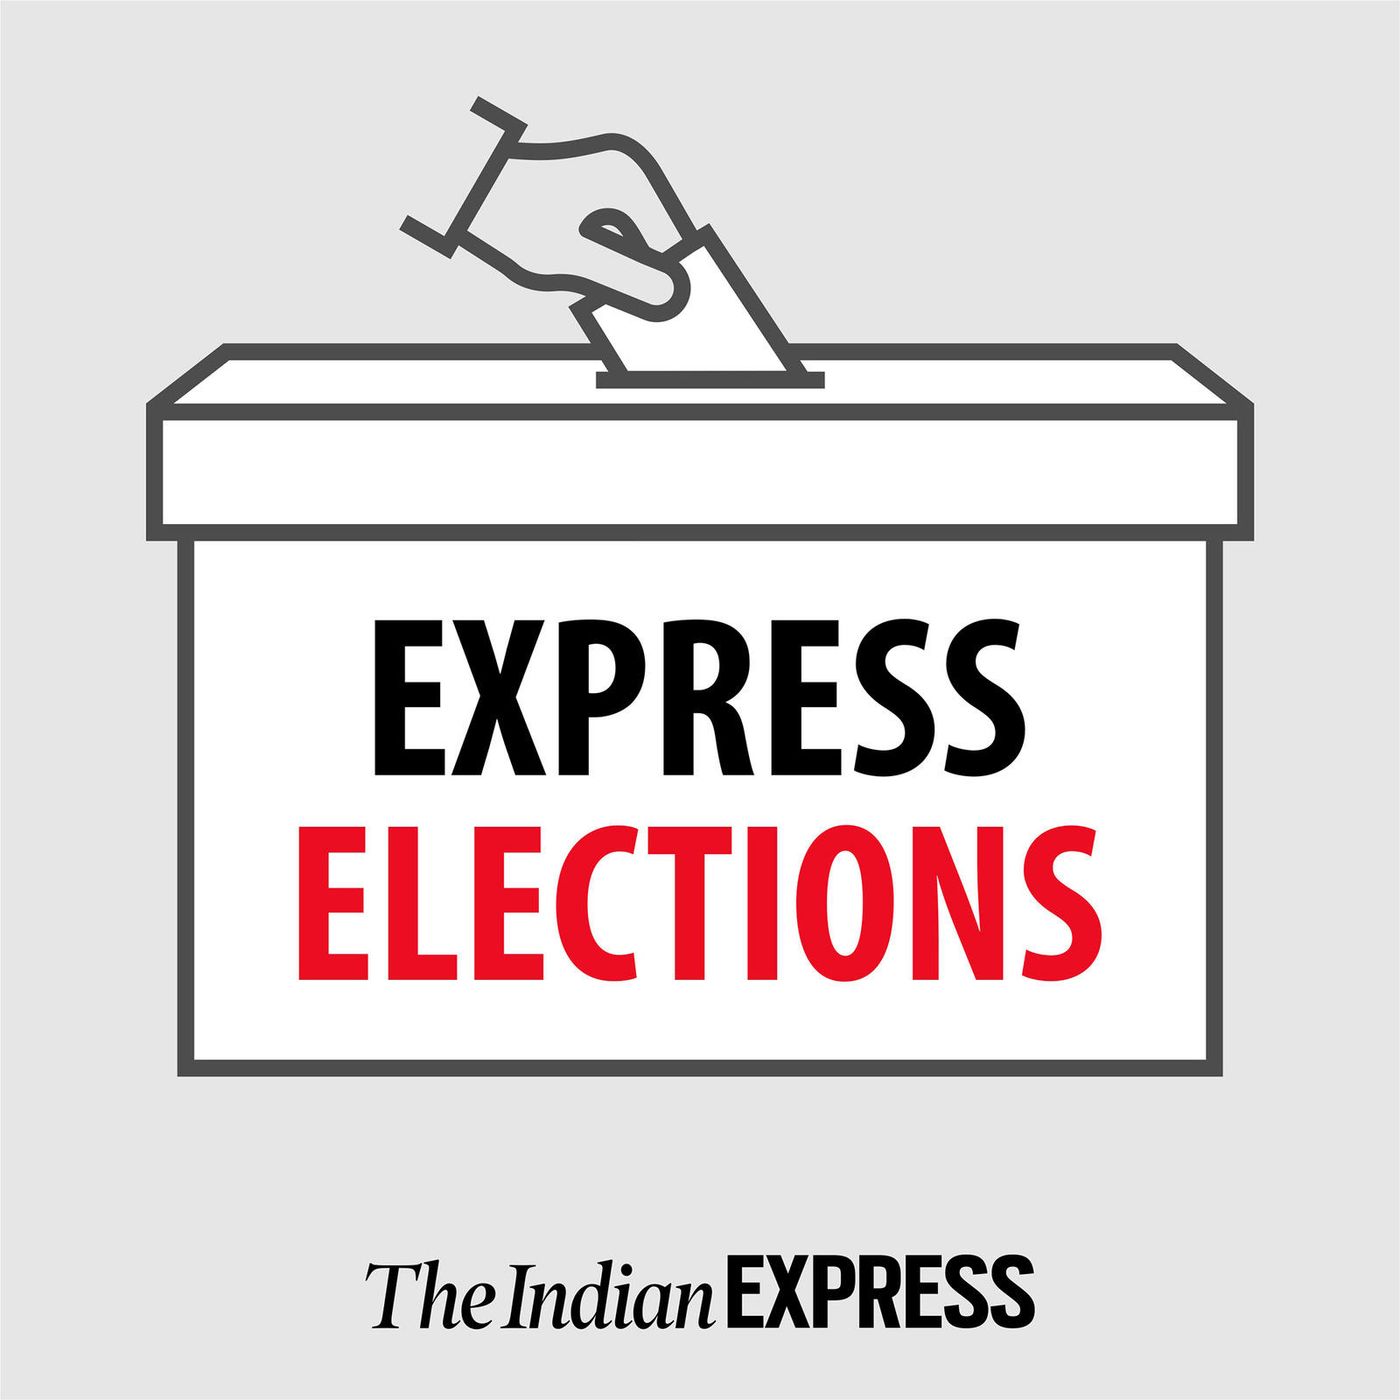 Express Elections